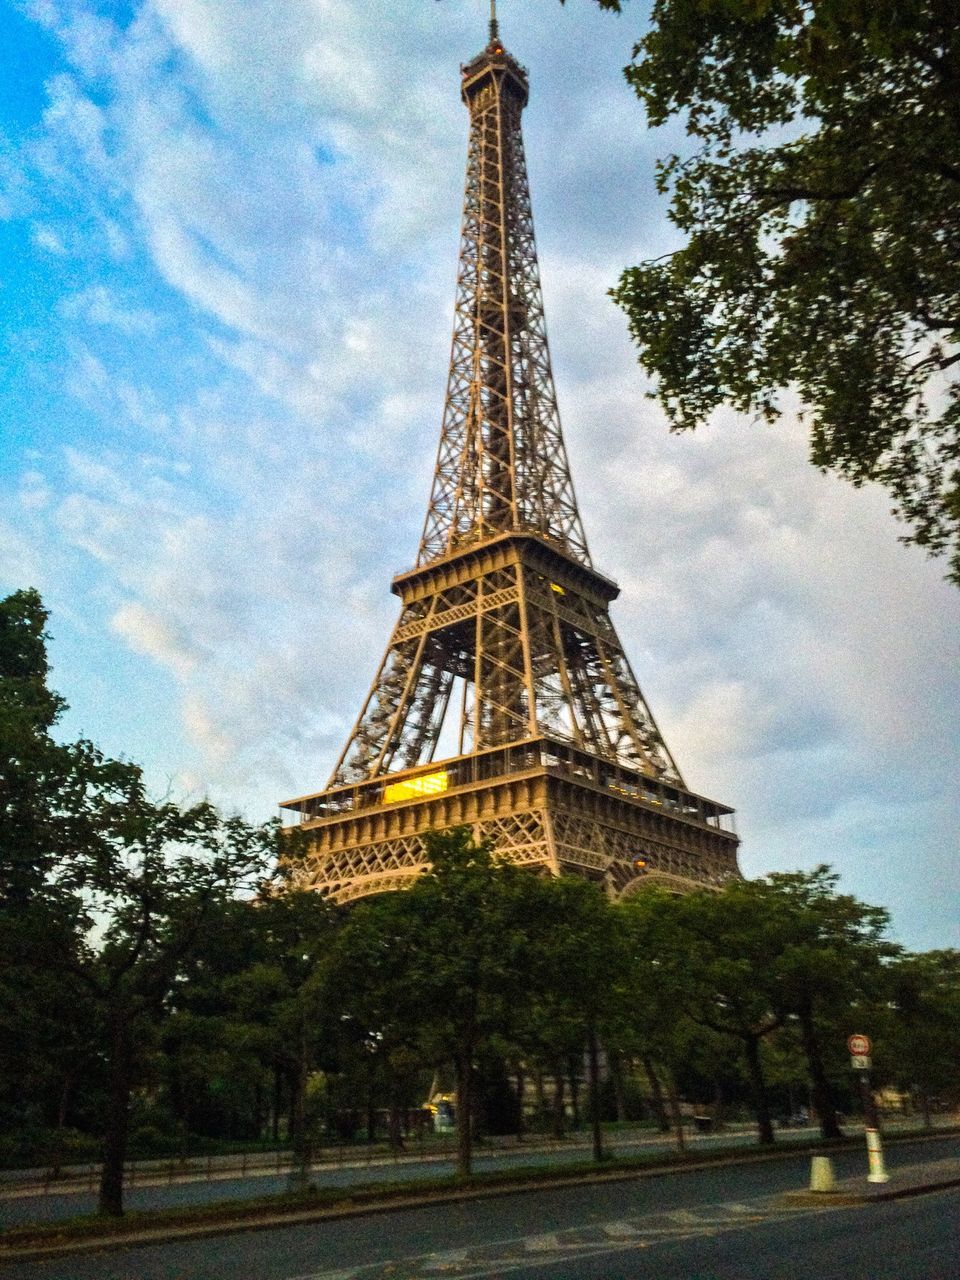 eiffel tower, architecture, built structure, tower, tall - high, famous place, international landmark, travel destinations, sky, culture, tourism, tree, capital cities, travel, building exterior, low angle view, city, cloud - sky, history, metal